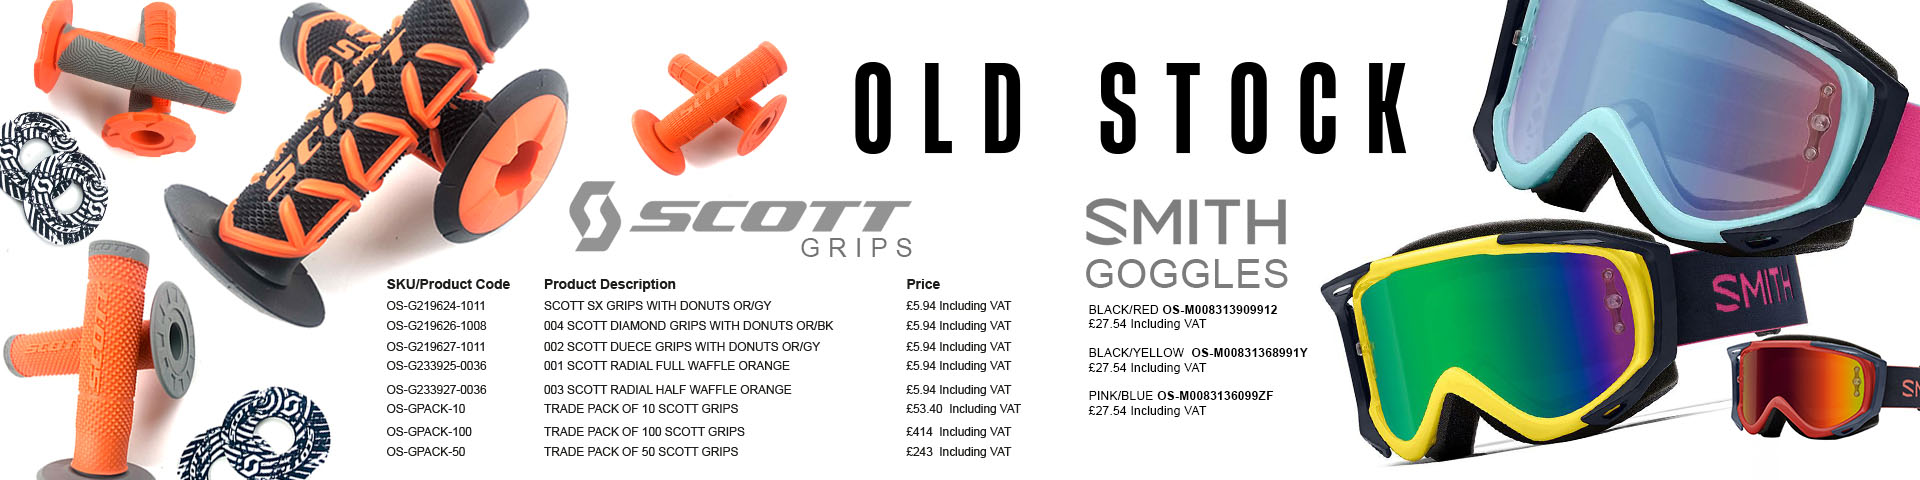 smith goggles and scott grips stock clearance deals